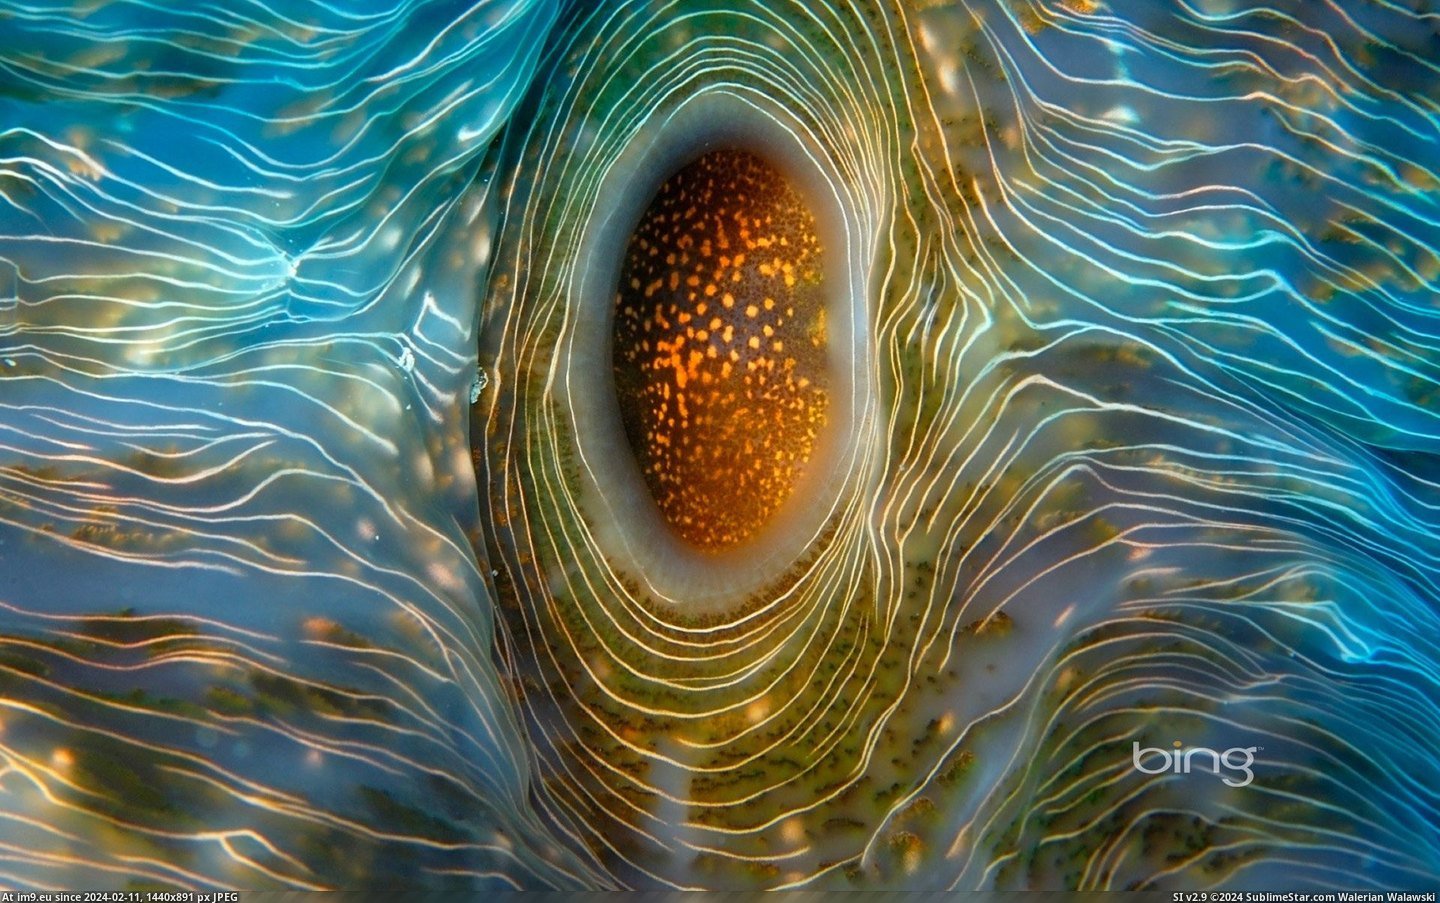 Bear paw clam near Rongelap Atoll in the Marshall Islands (© Aurora Photos) (in Best photos of February 2013)